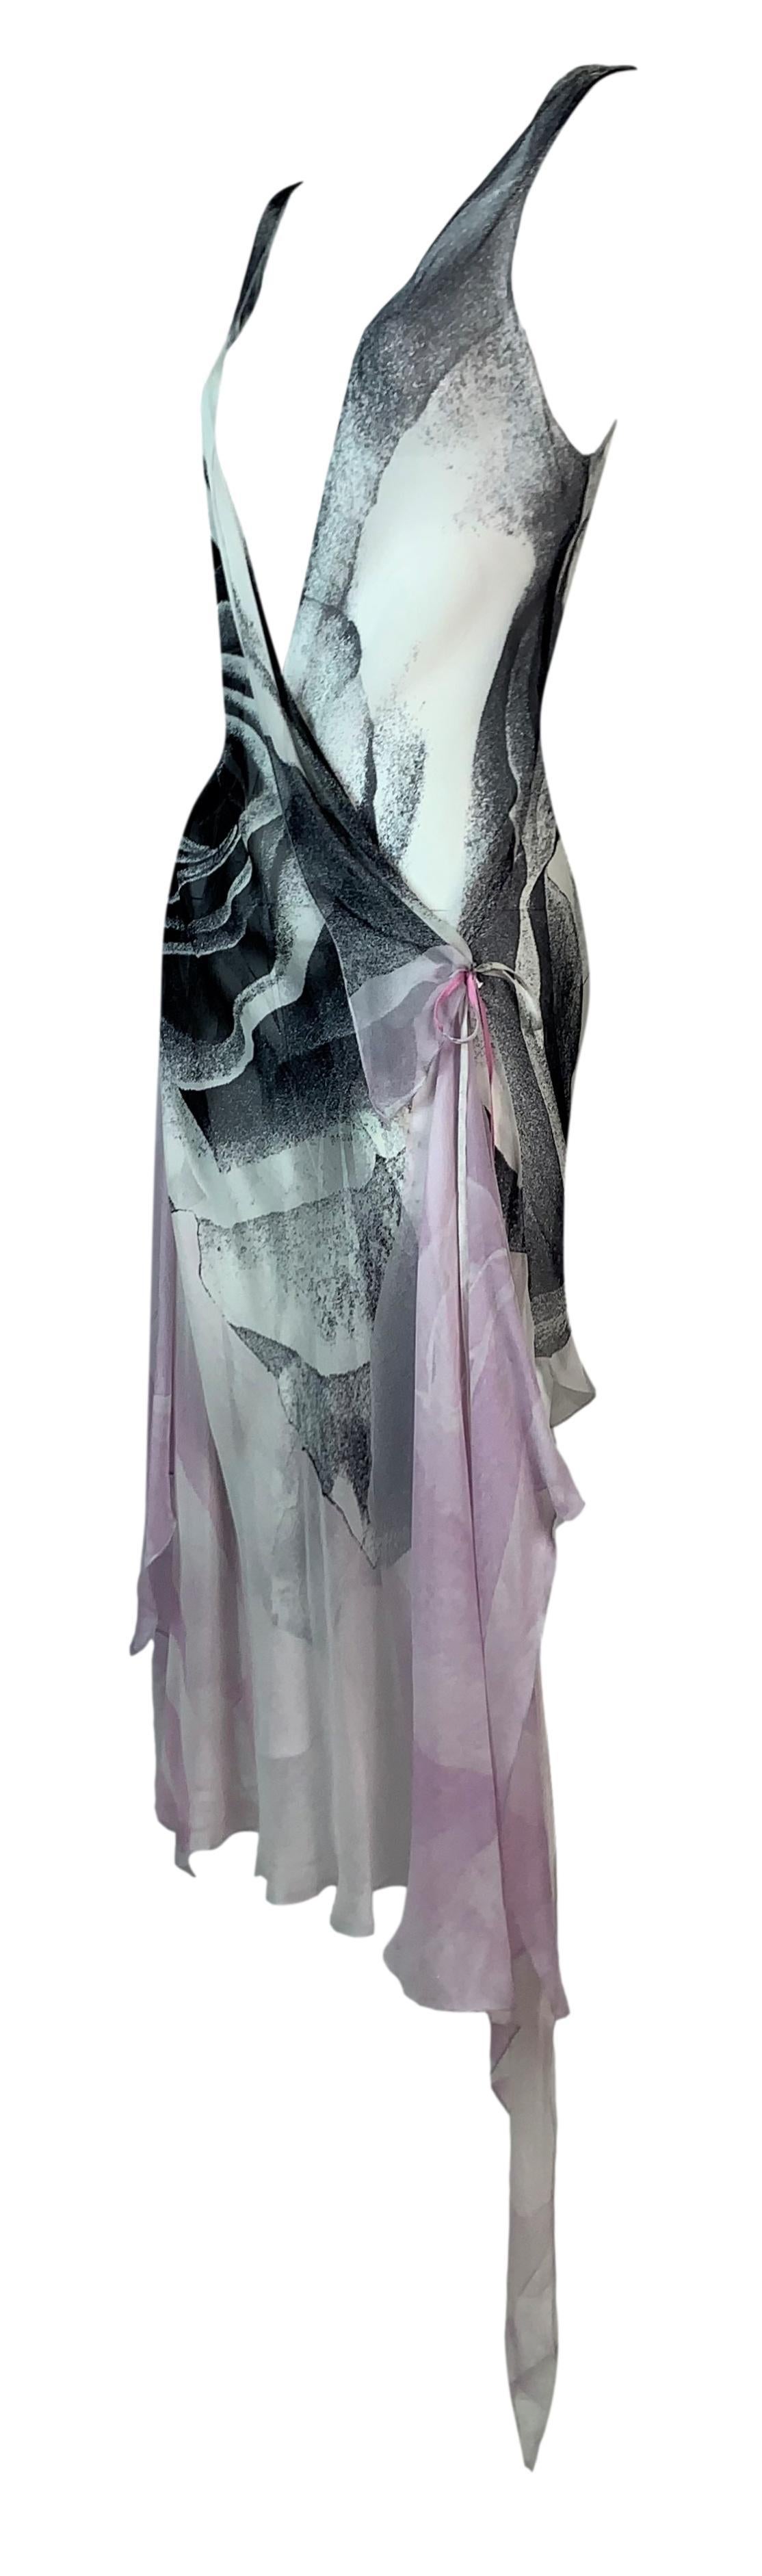 DESIGNER: S/S 2000 Roberto Cavalli

Please contact us for more images or information

CONDITION: Good- no flaws

FABRIC: Silk

COUNTRY: Italy

SIZE: M

MEASUREMENTS; provided as a courtesy only- not a guarantee of fit: 

Chest: 32-42